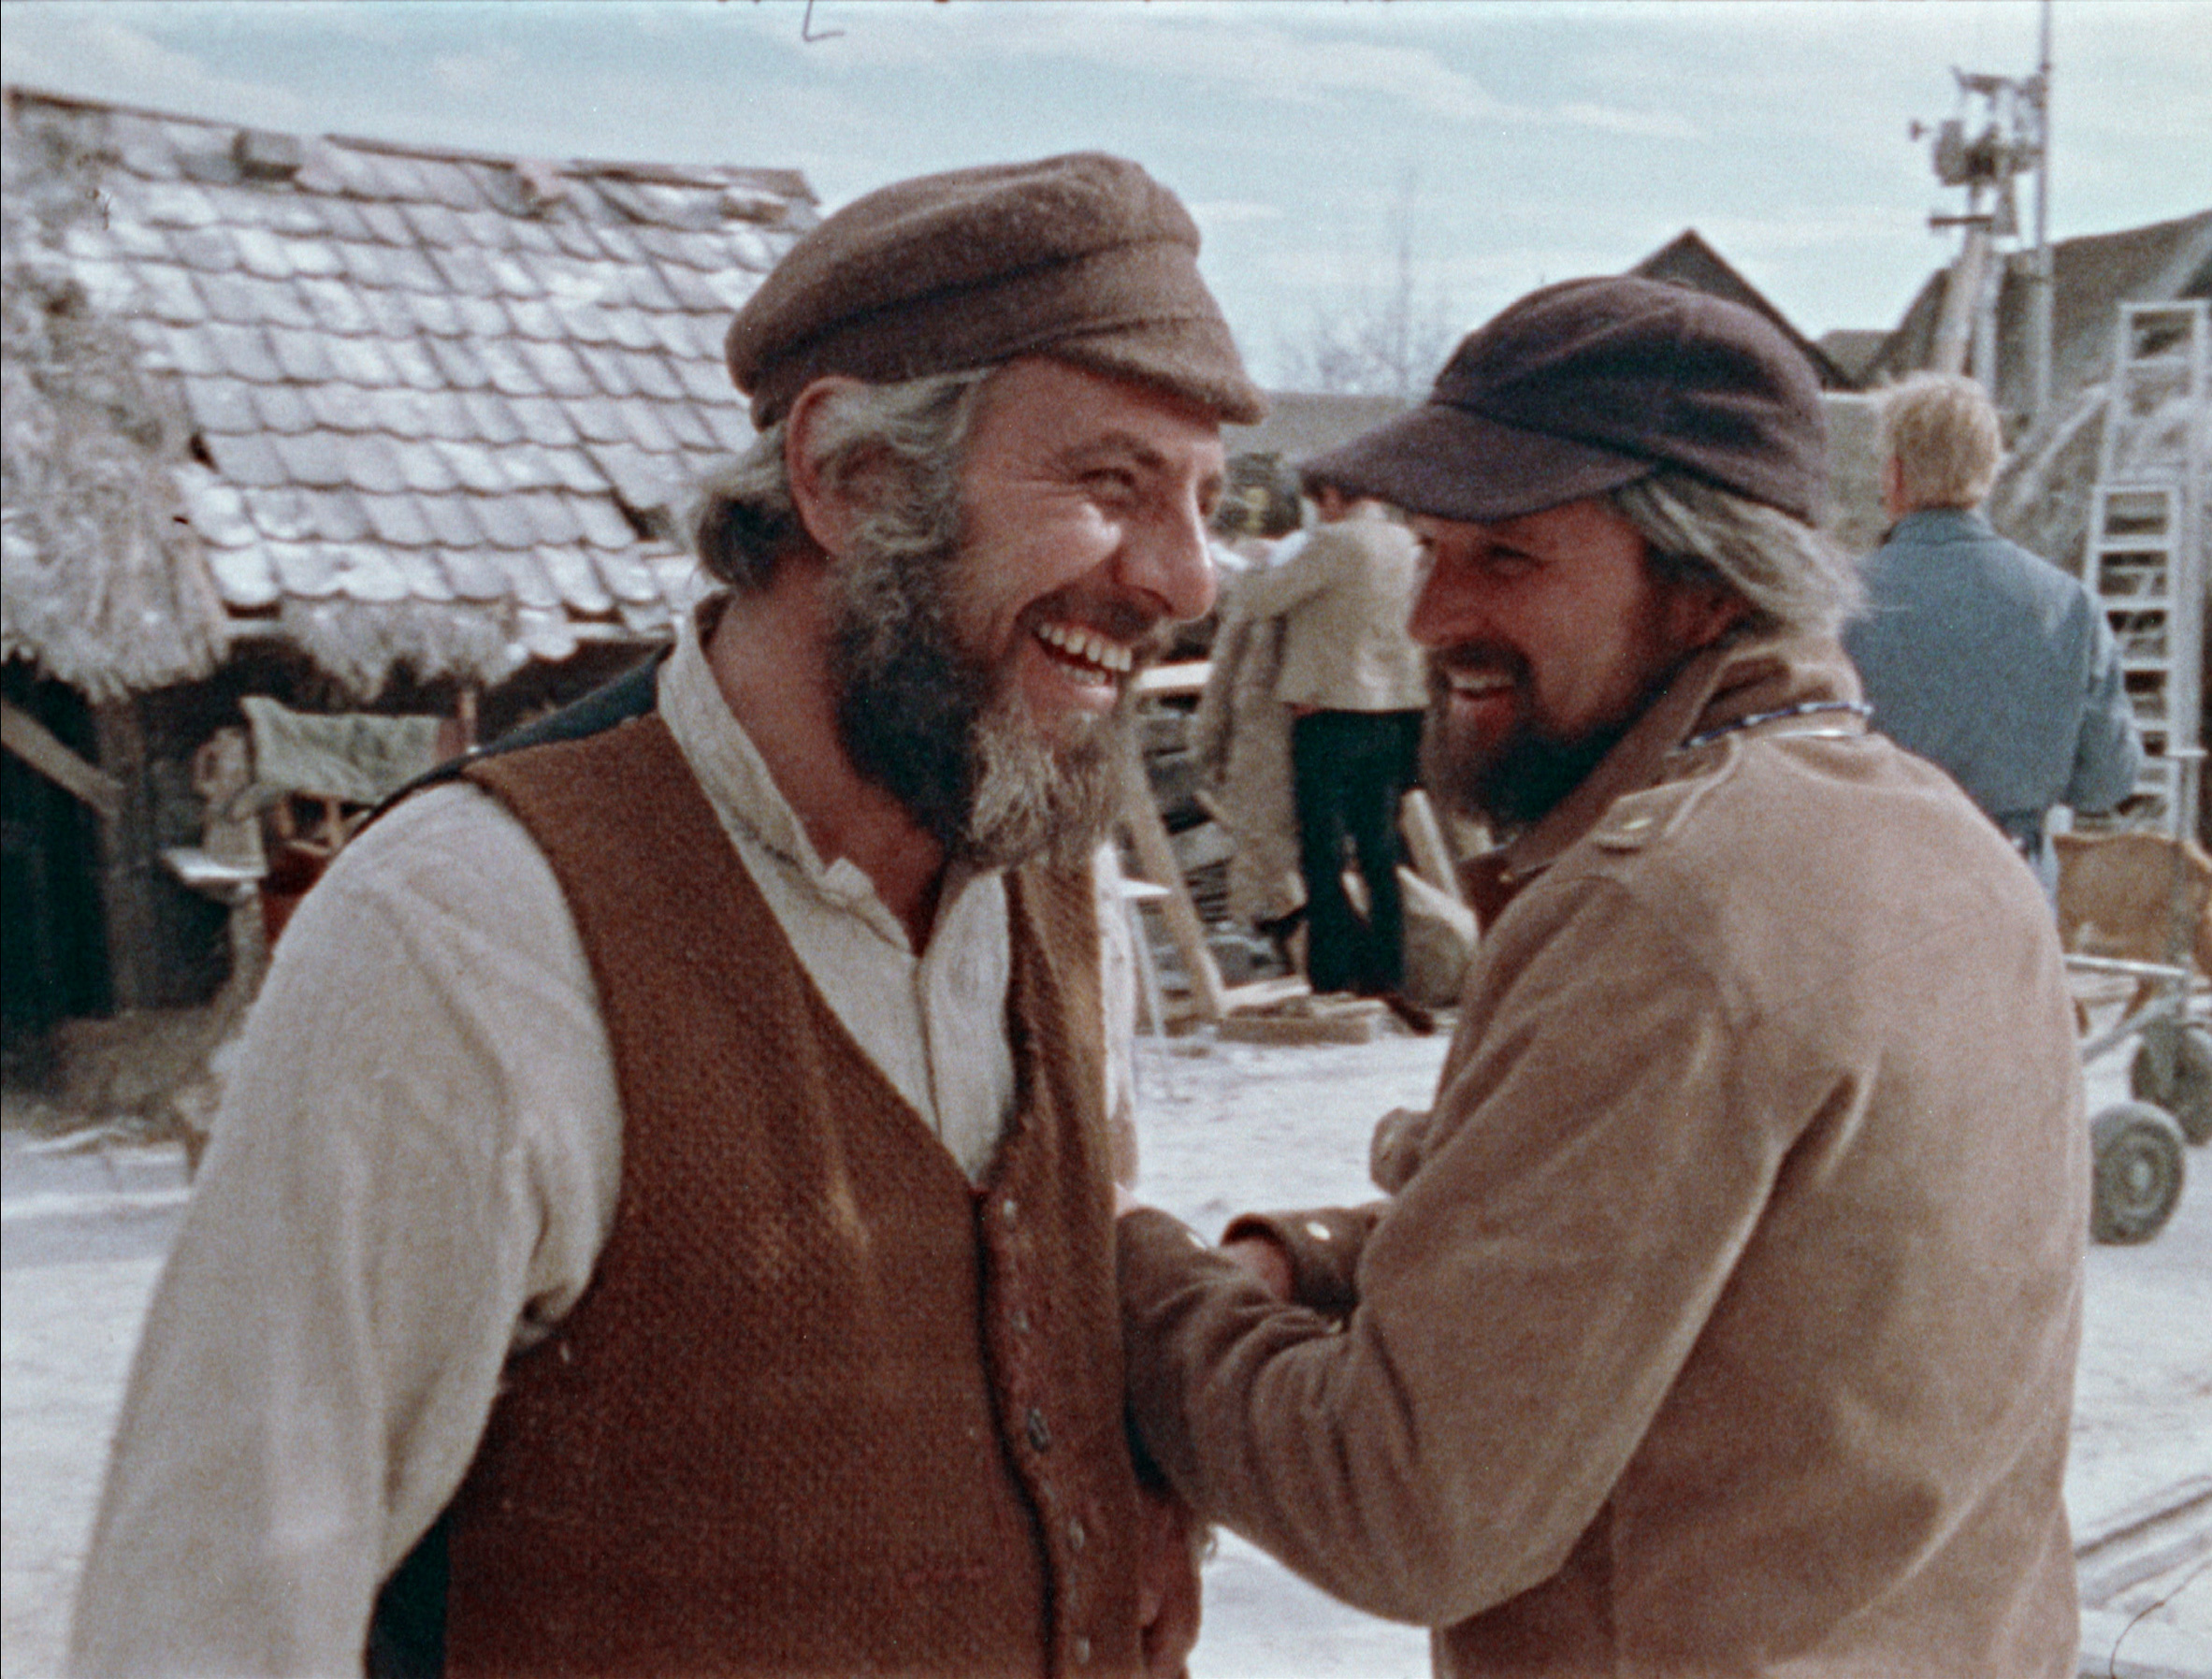 Director Norman Jewison (right) and star Topol as Tevye on the set of Fiddler on the Roof. As seen in Fiddler's Journey to the Big Screen